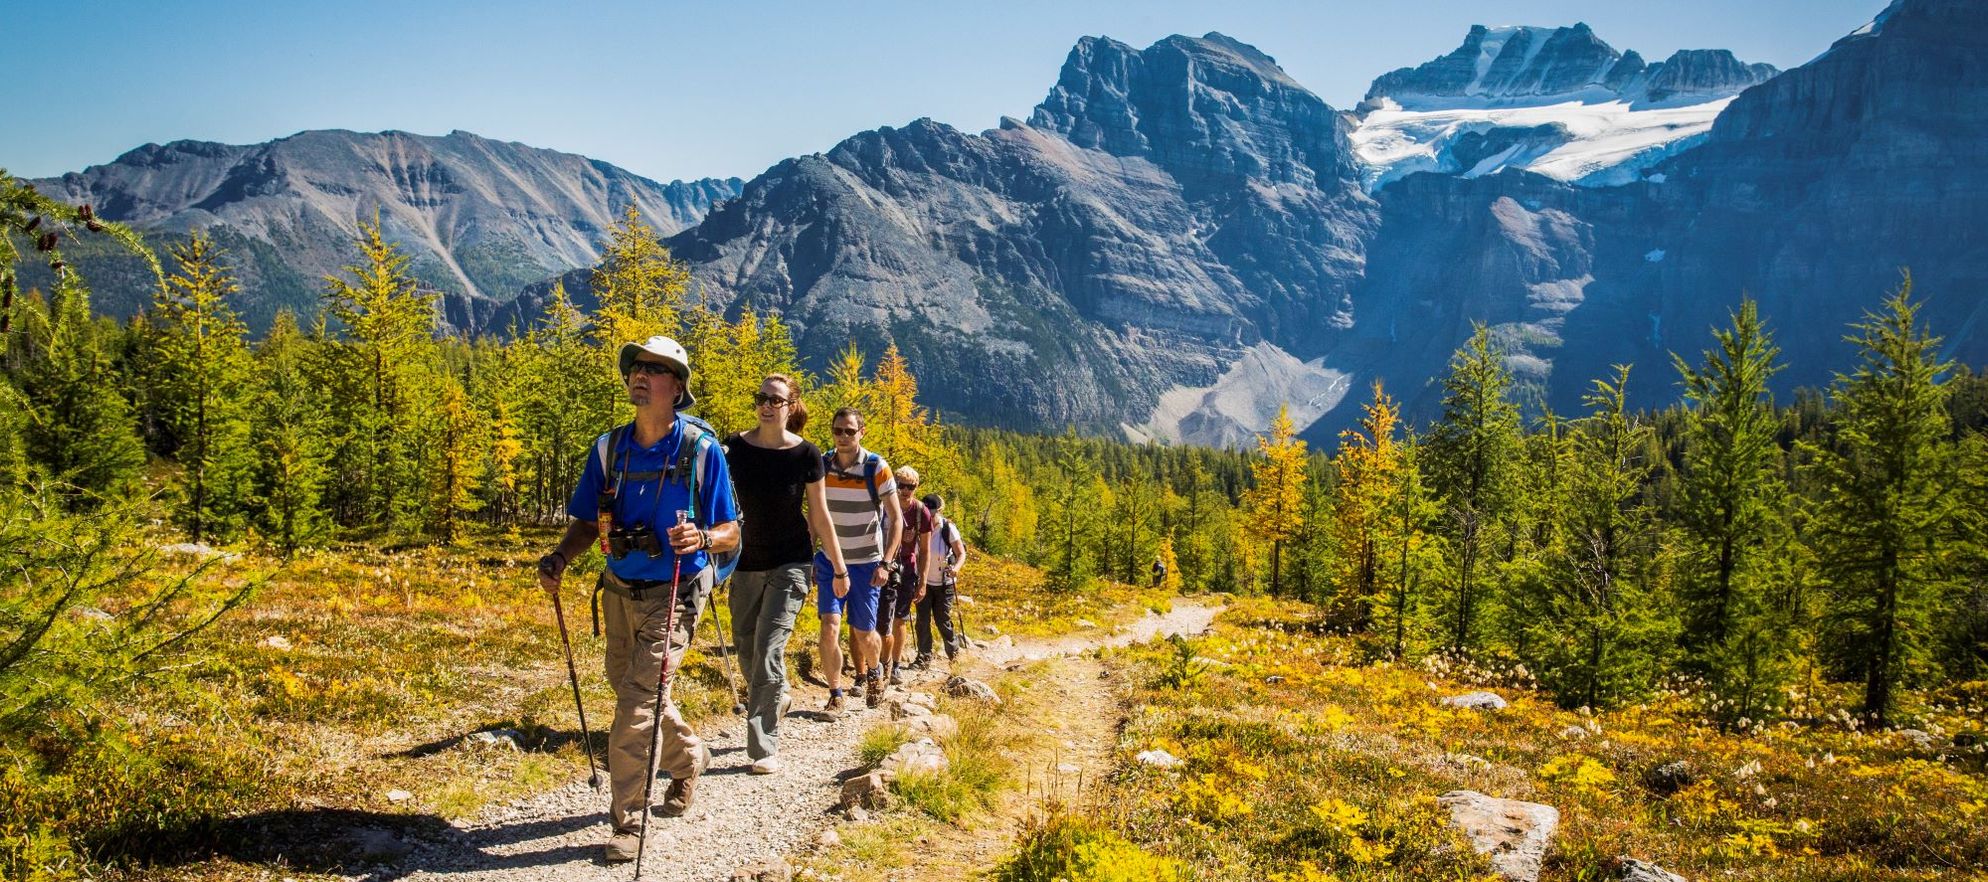 People go on a hike in Banff National Park in Larch Valley near Moraine Lake. Mountain in the background and walking through an alpine field.